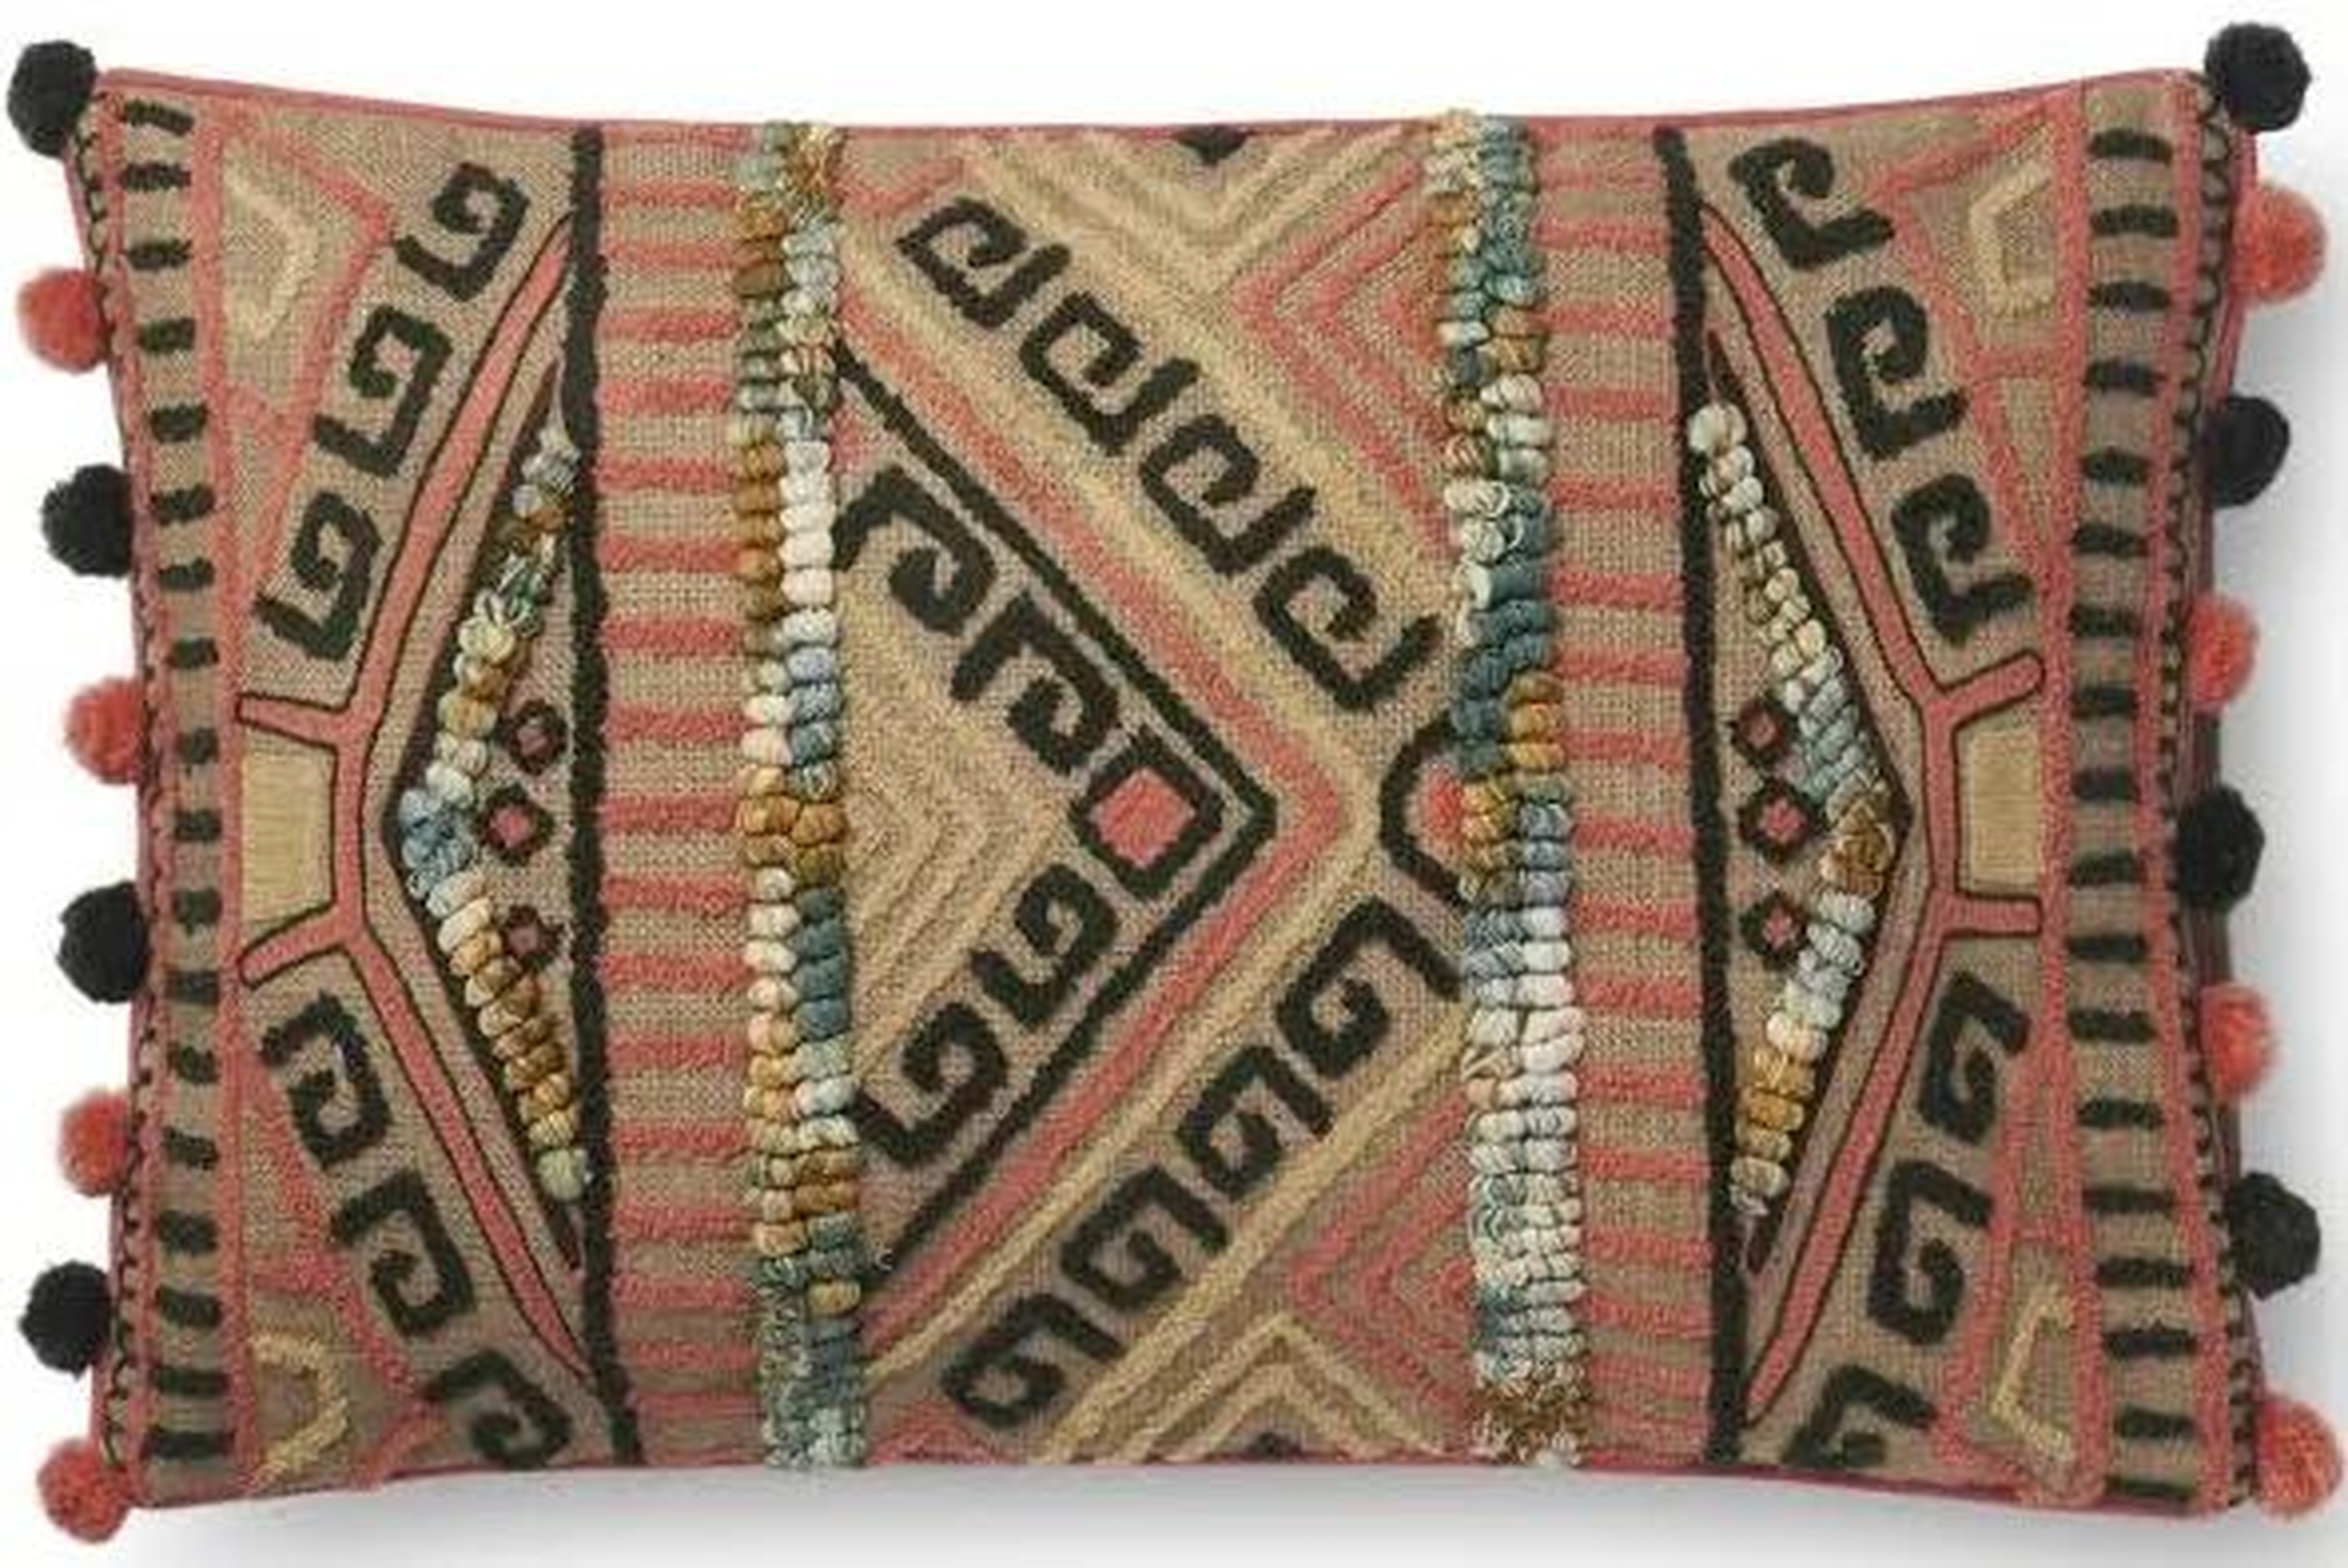 Embroidered Throw Pillow with Pom Poms, 21" x 13" - Loloi Rugs